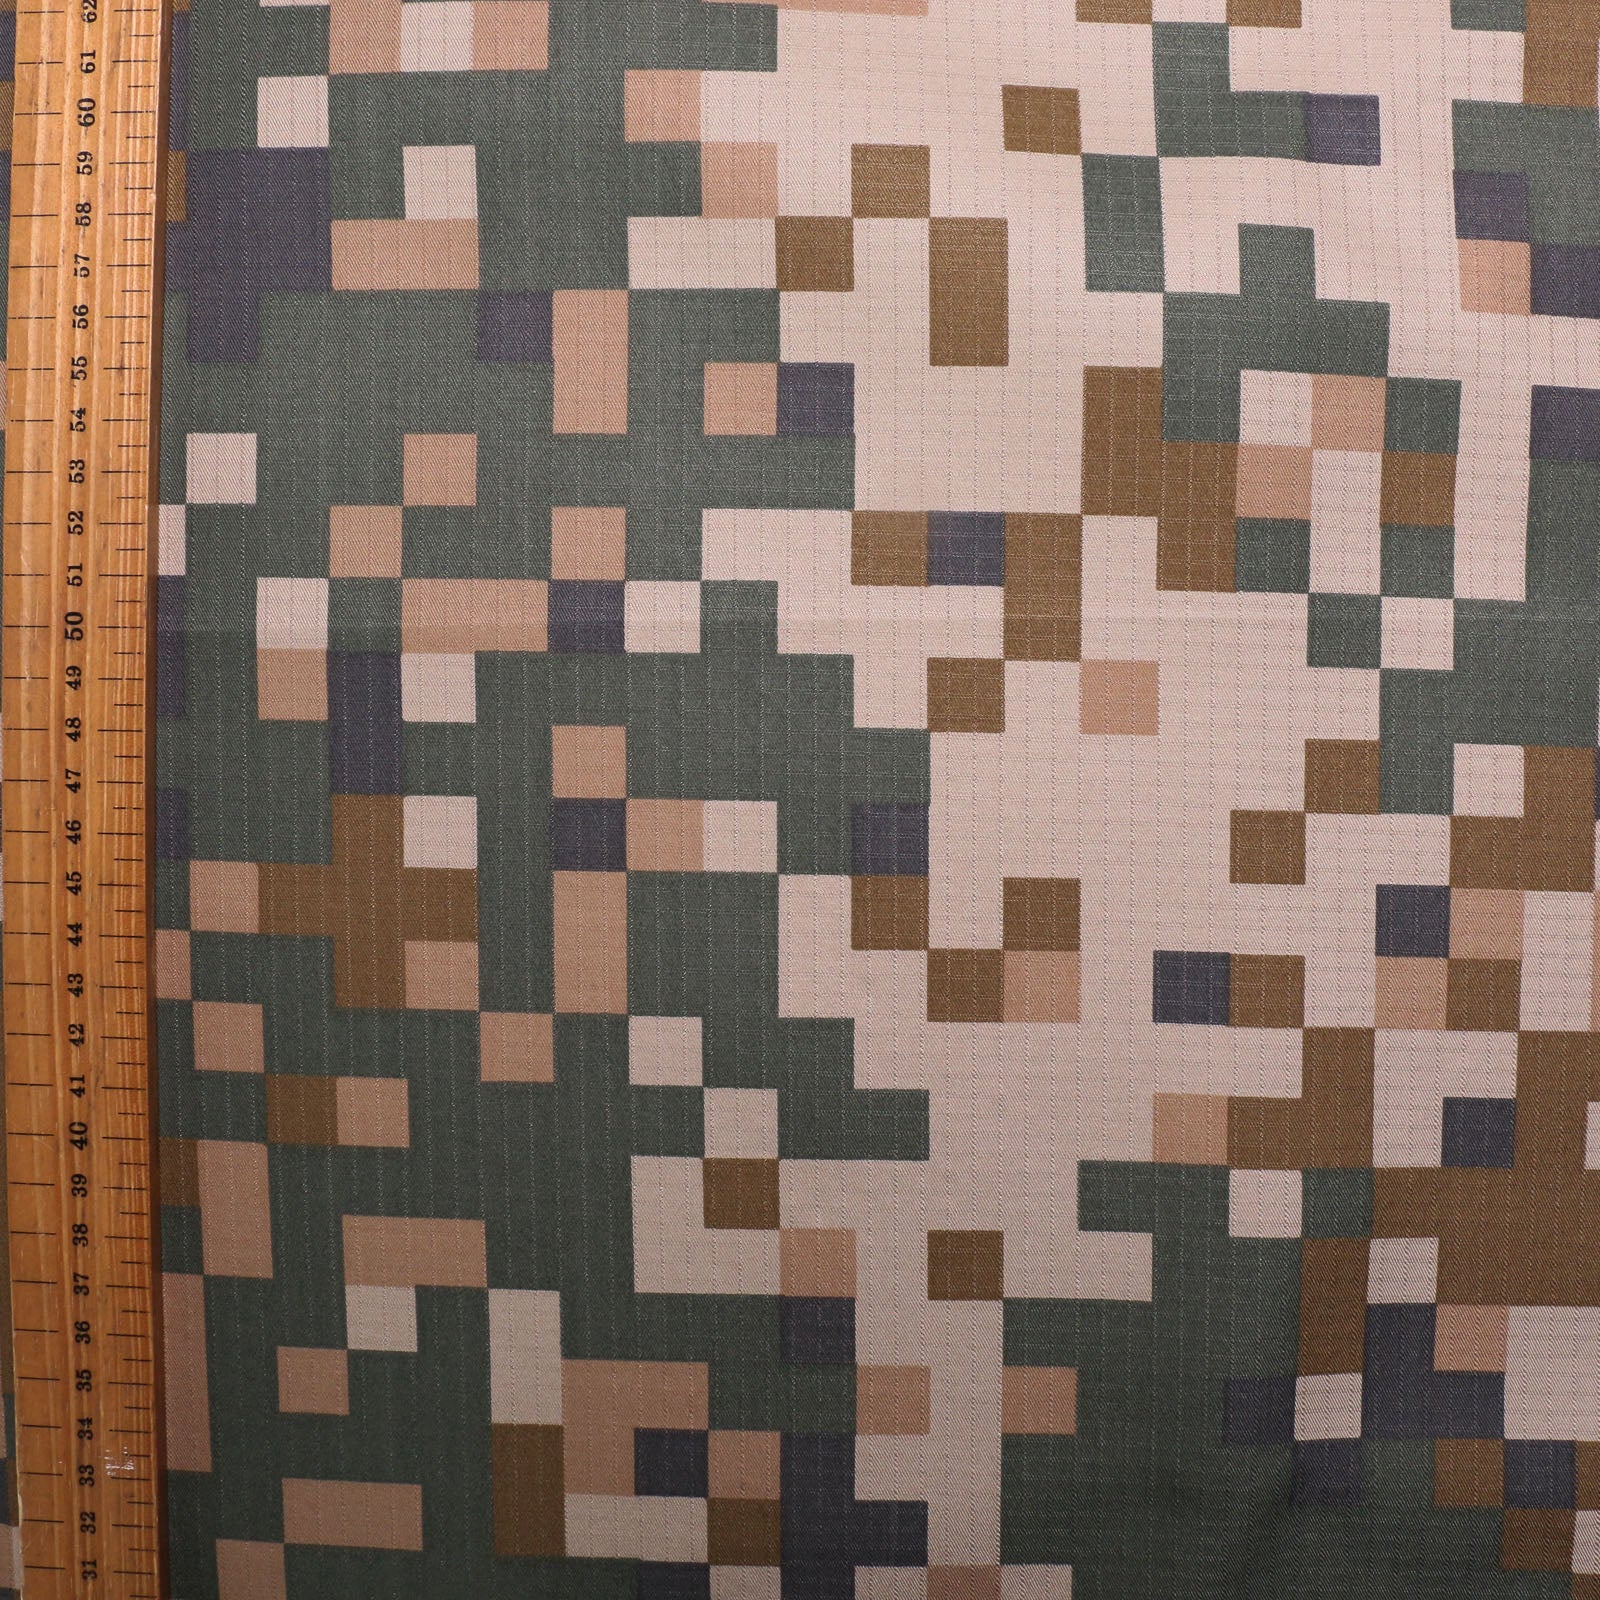 metre square woodland camouflage dressmaking cotton ripstop fabric in khaki green beige and brown